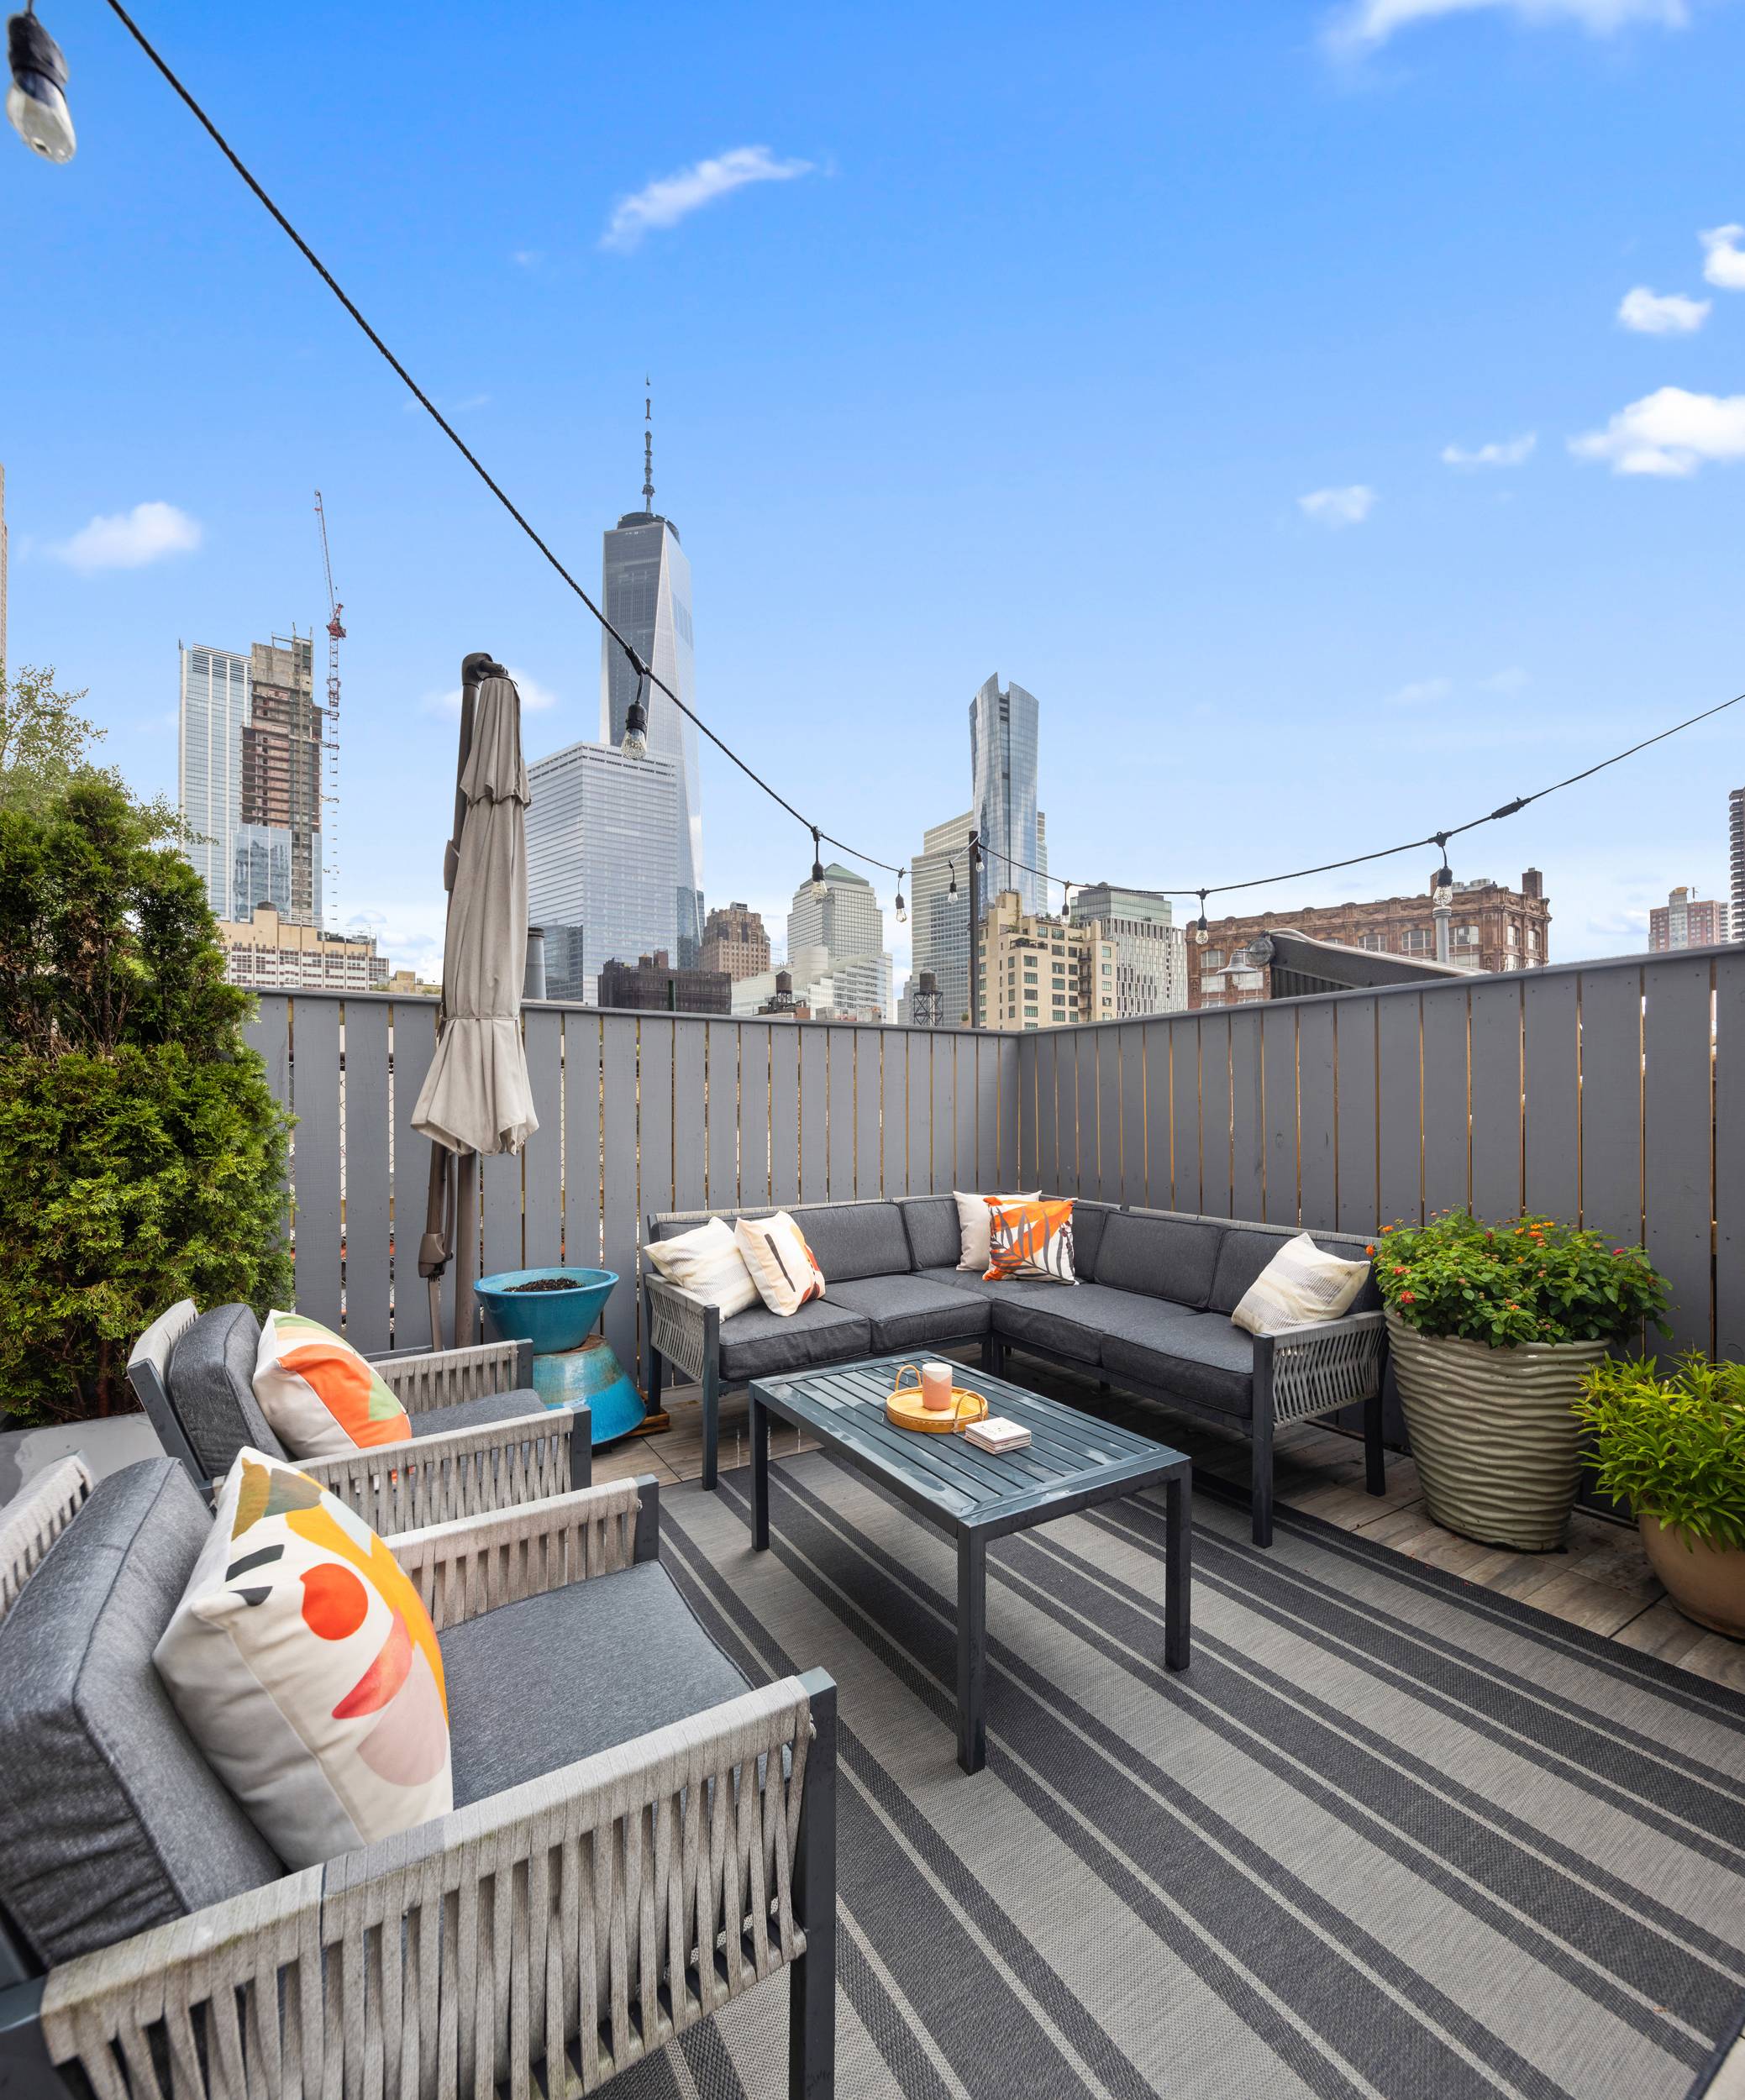 Slip into your downtown dream life with this never before offered 2 bedroom 2 bath Tribeca Penthouse duplex loft with 500 square feet of private roof deck space !